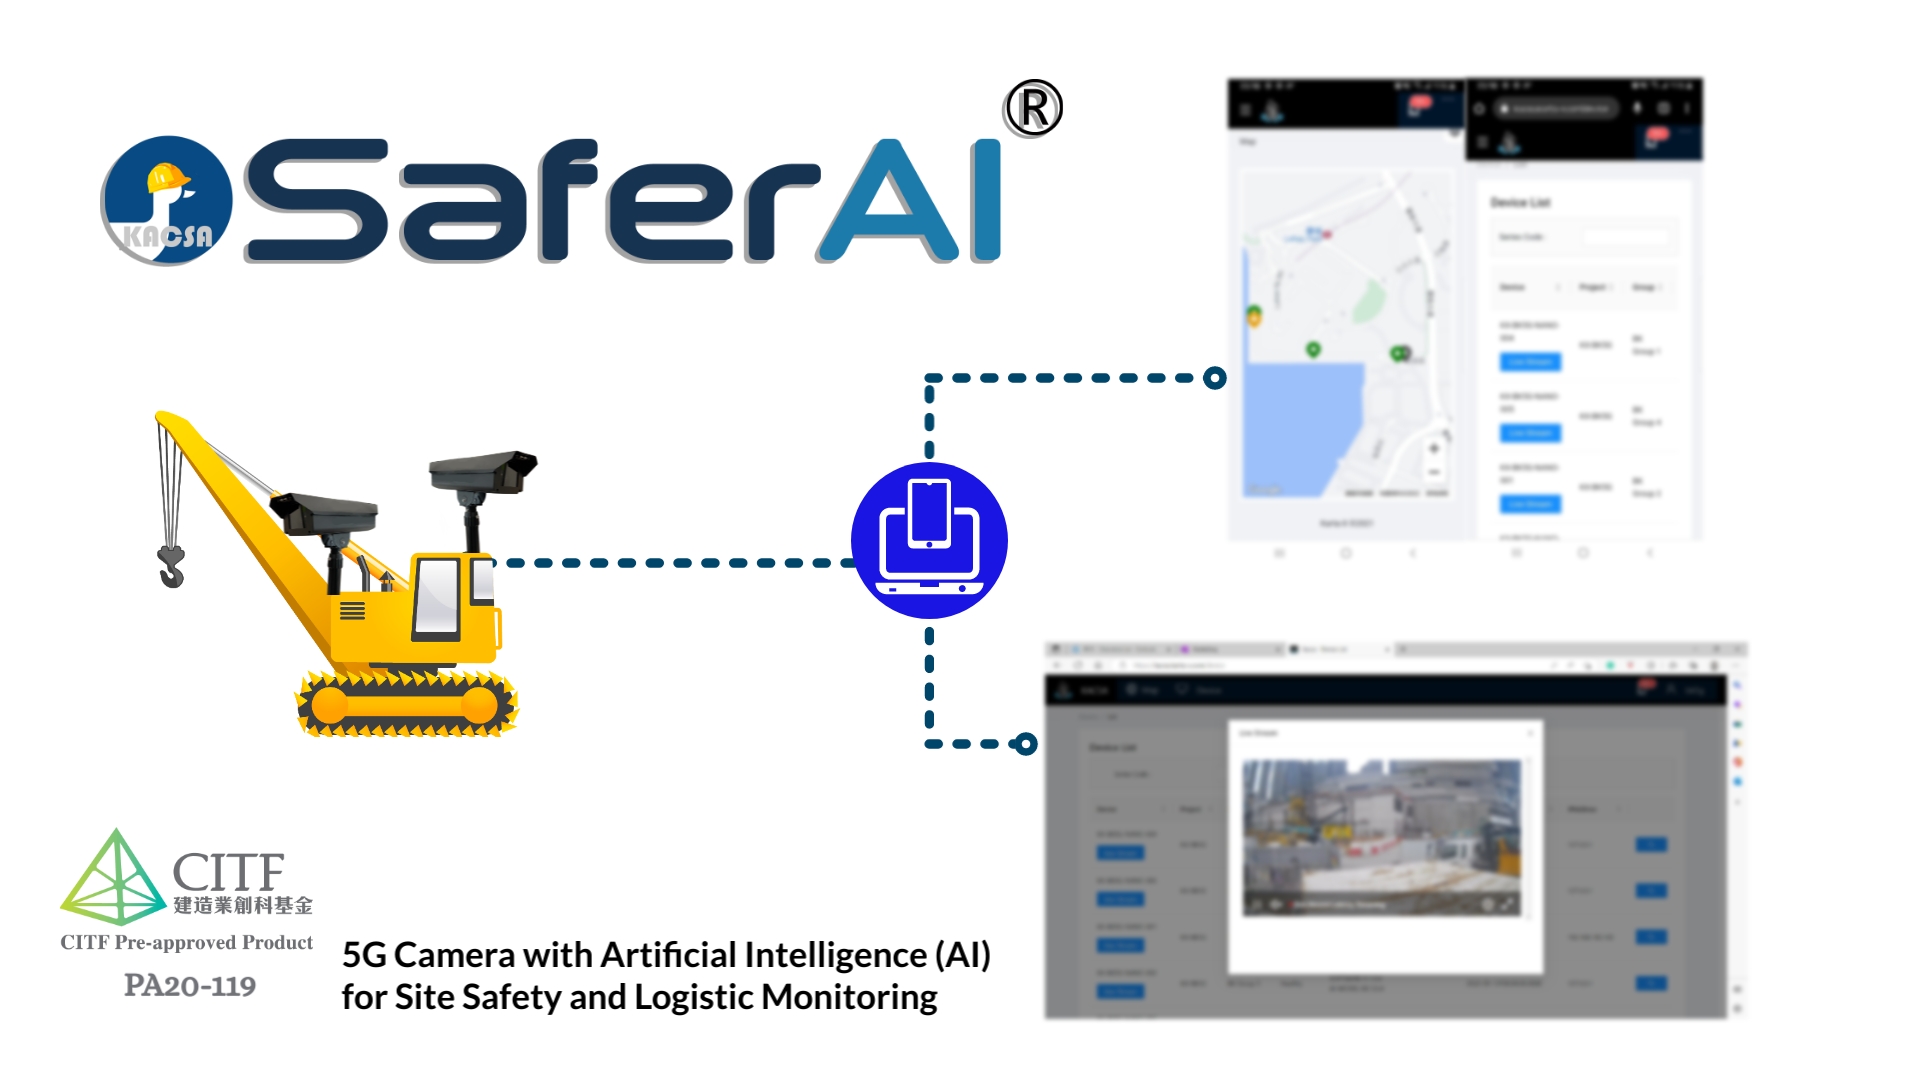 5G Camera with Artificial Intelligence (AI) for Site Safety and Logistic Monitoring